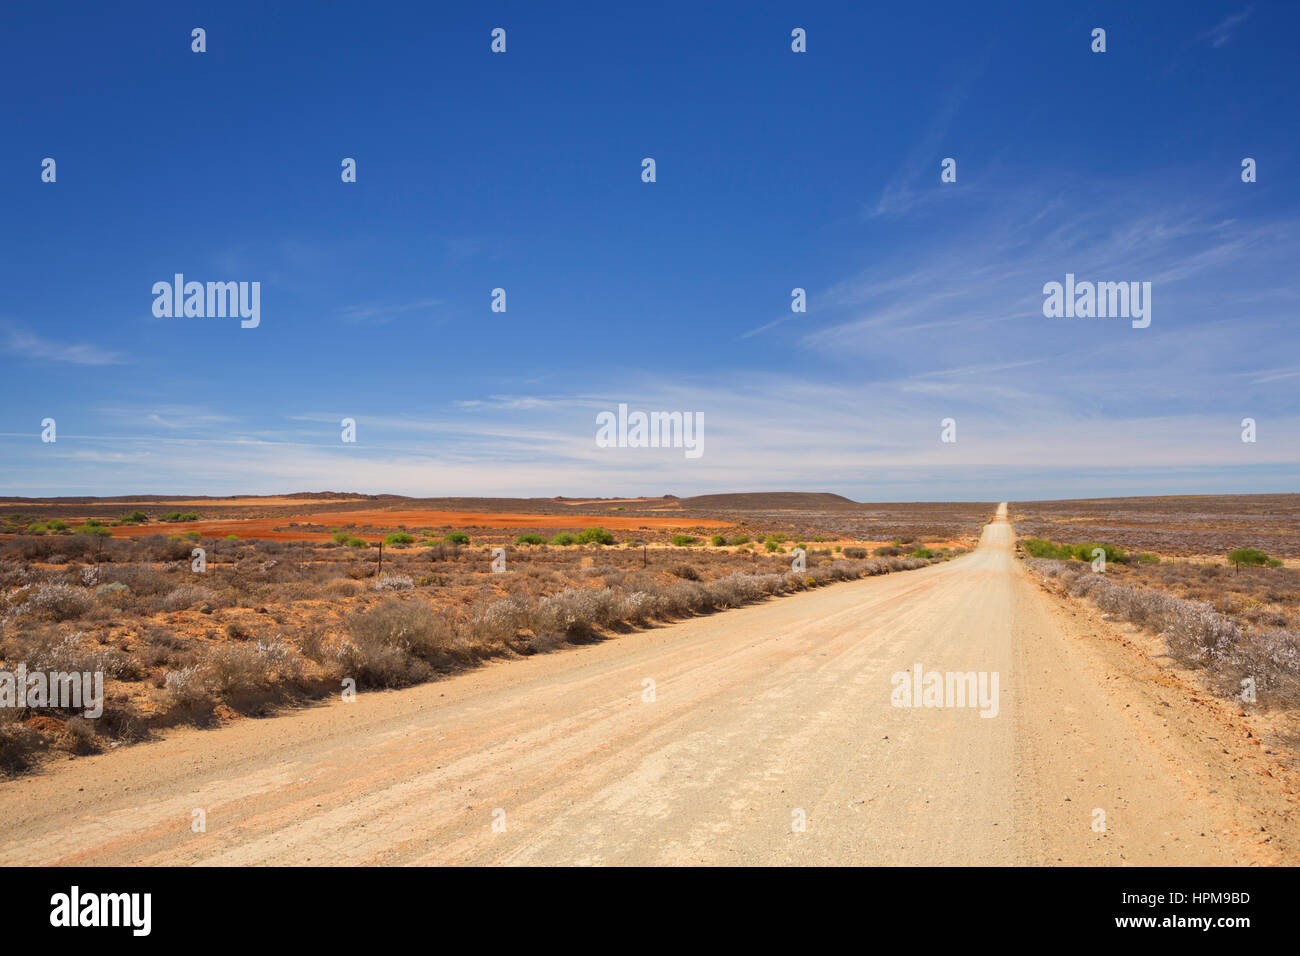 A straight dirt road through the dry Karoo semi-desert in South Africa. Stock Photo